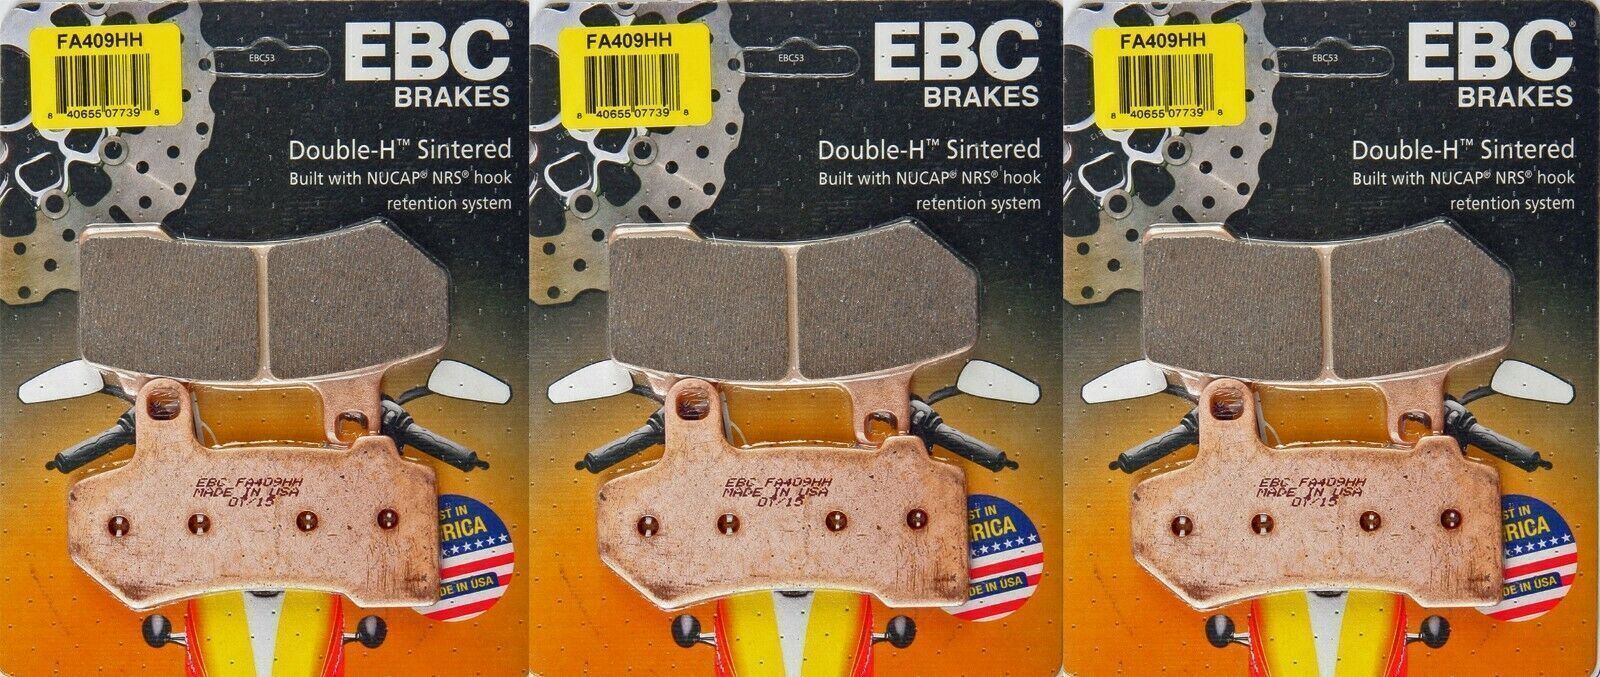 EBC FA409HH HH front & rear brake pads set fits various 2008-on HD FLH